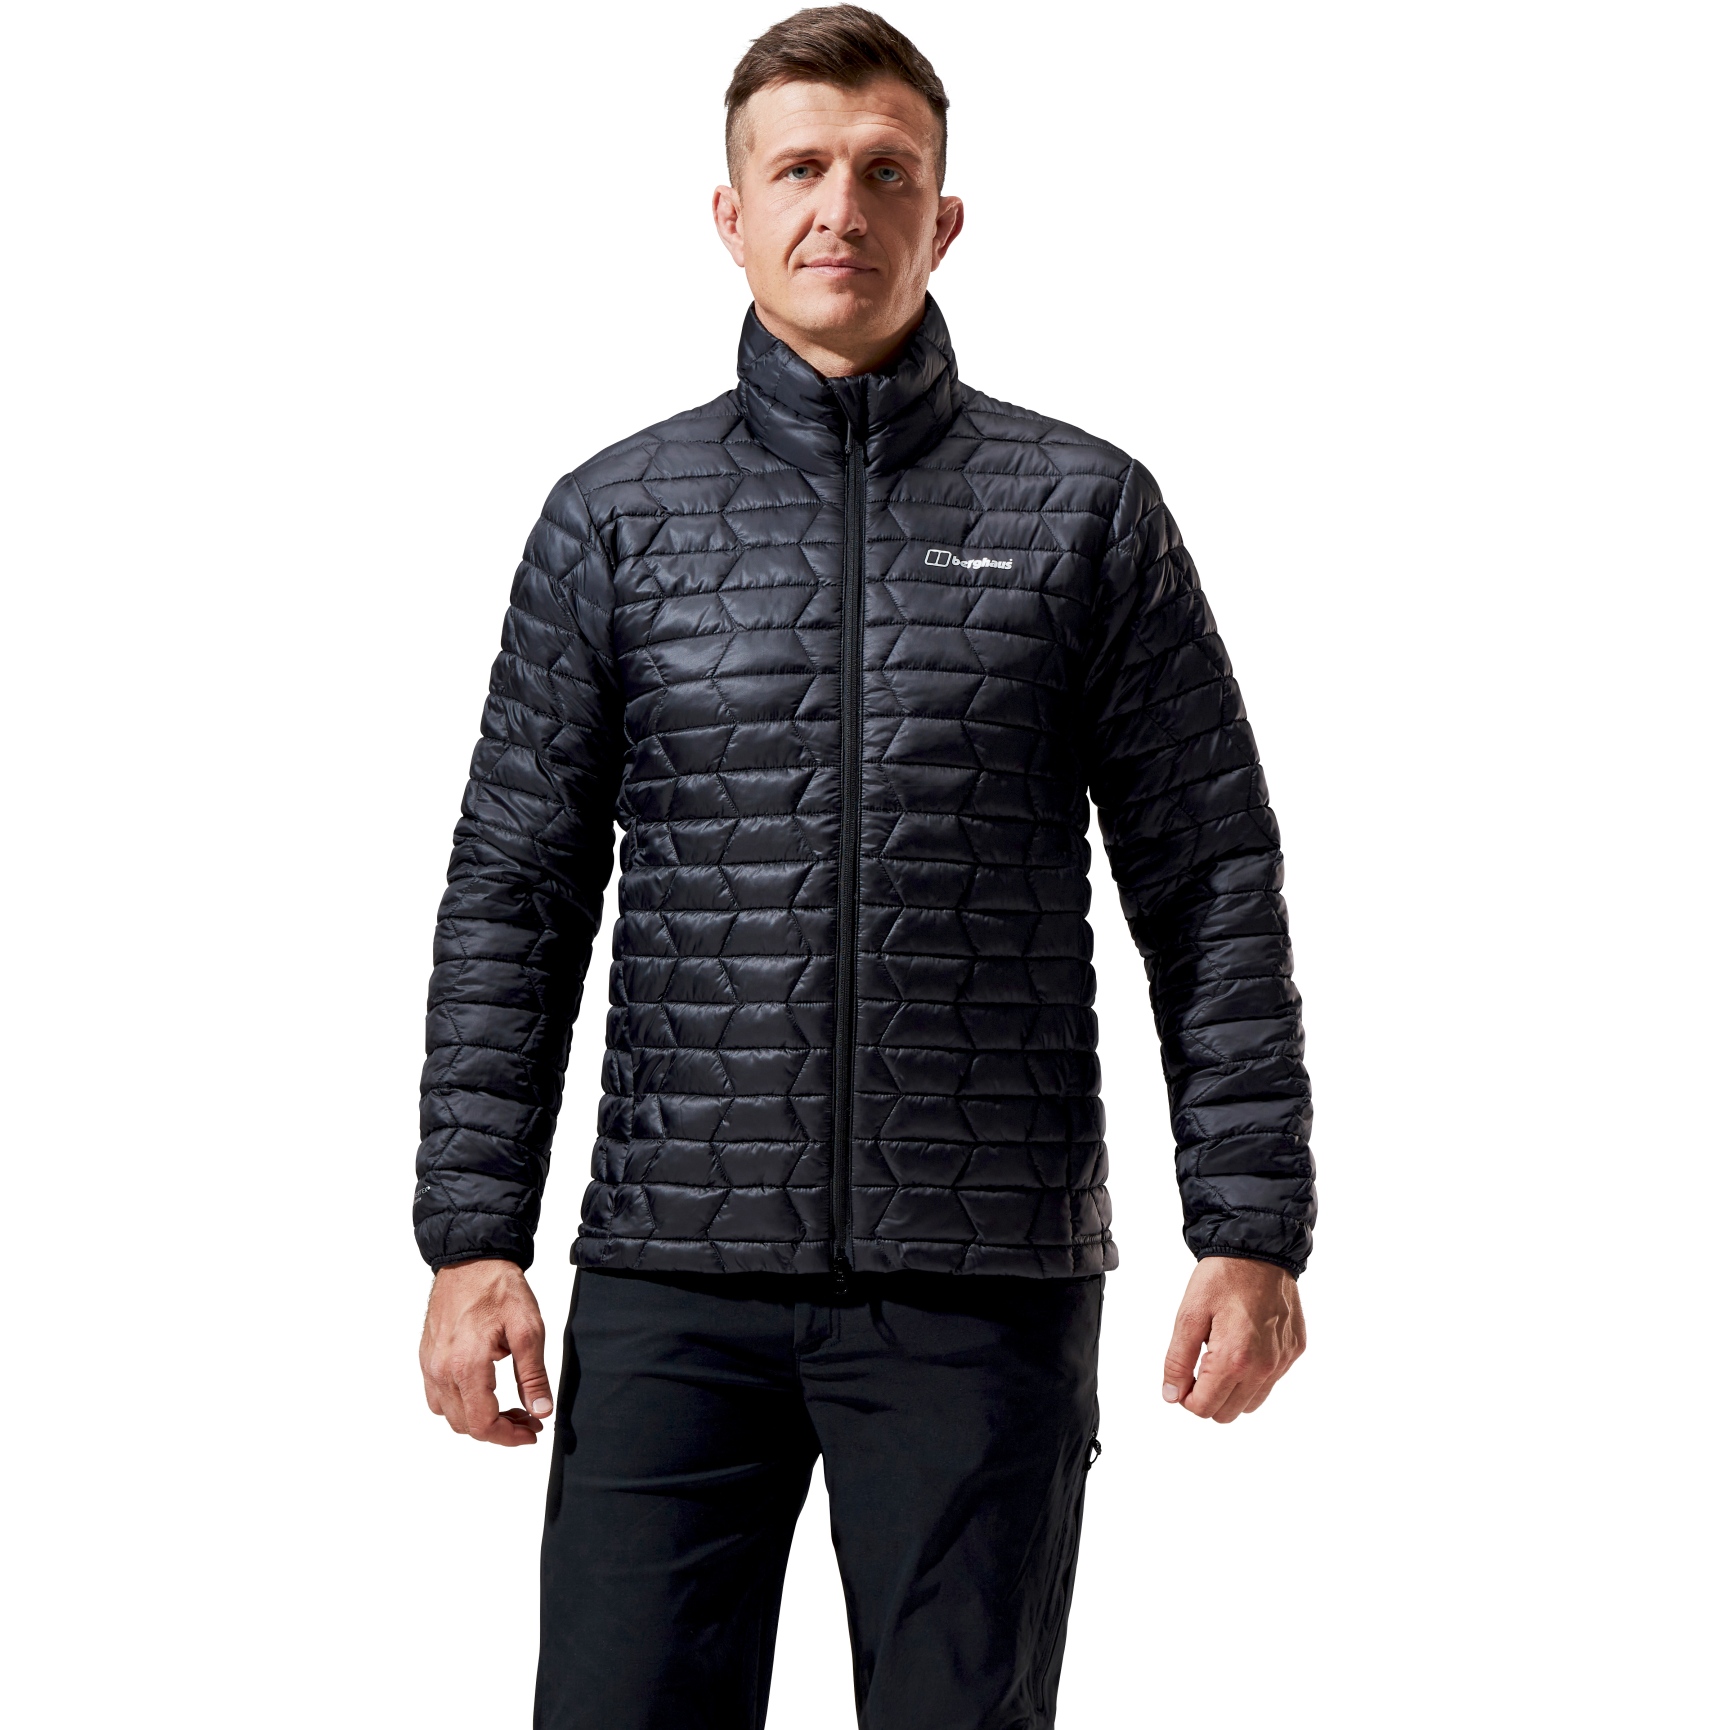 Picture of Berghaus Cuillin Insulated Jacket Men - Jet Black/Grey Pinstripe